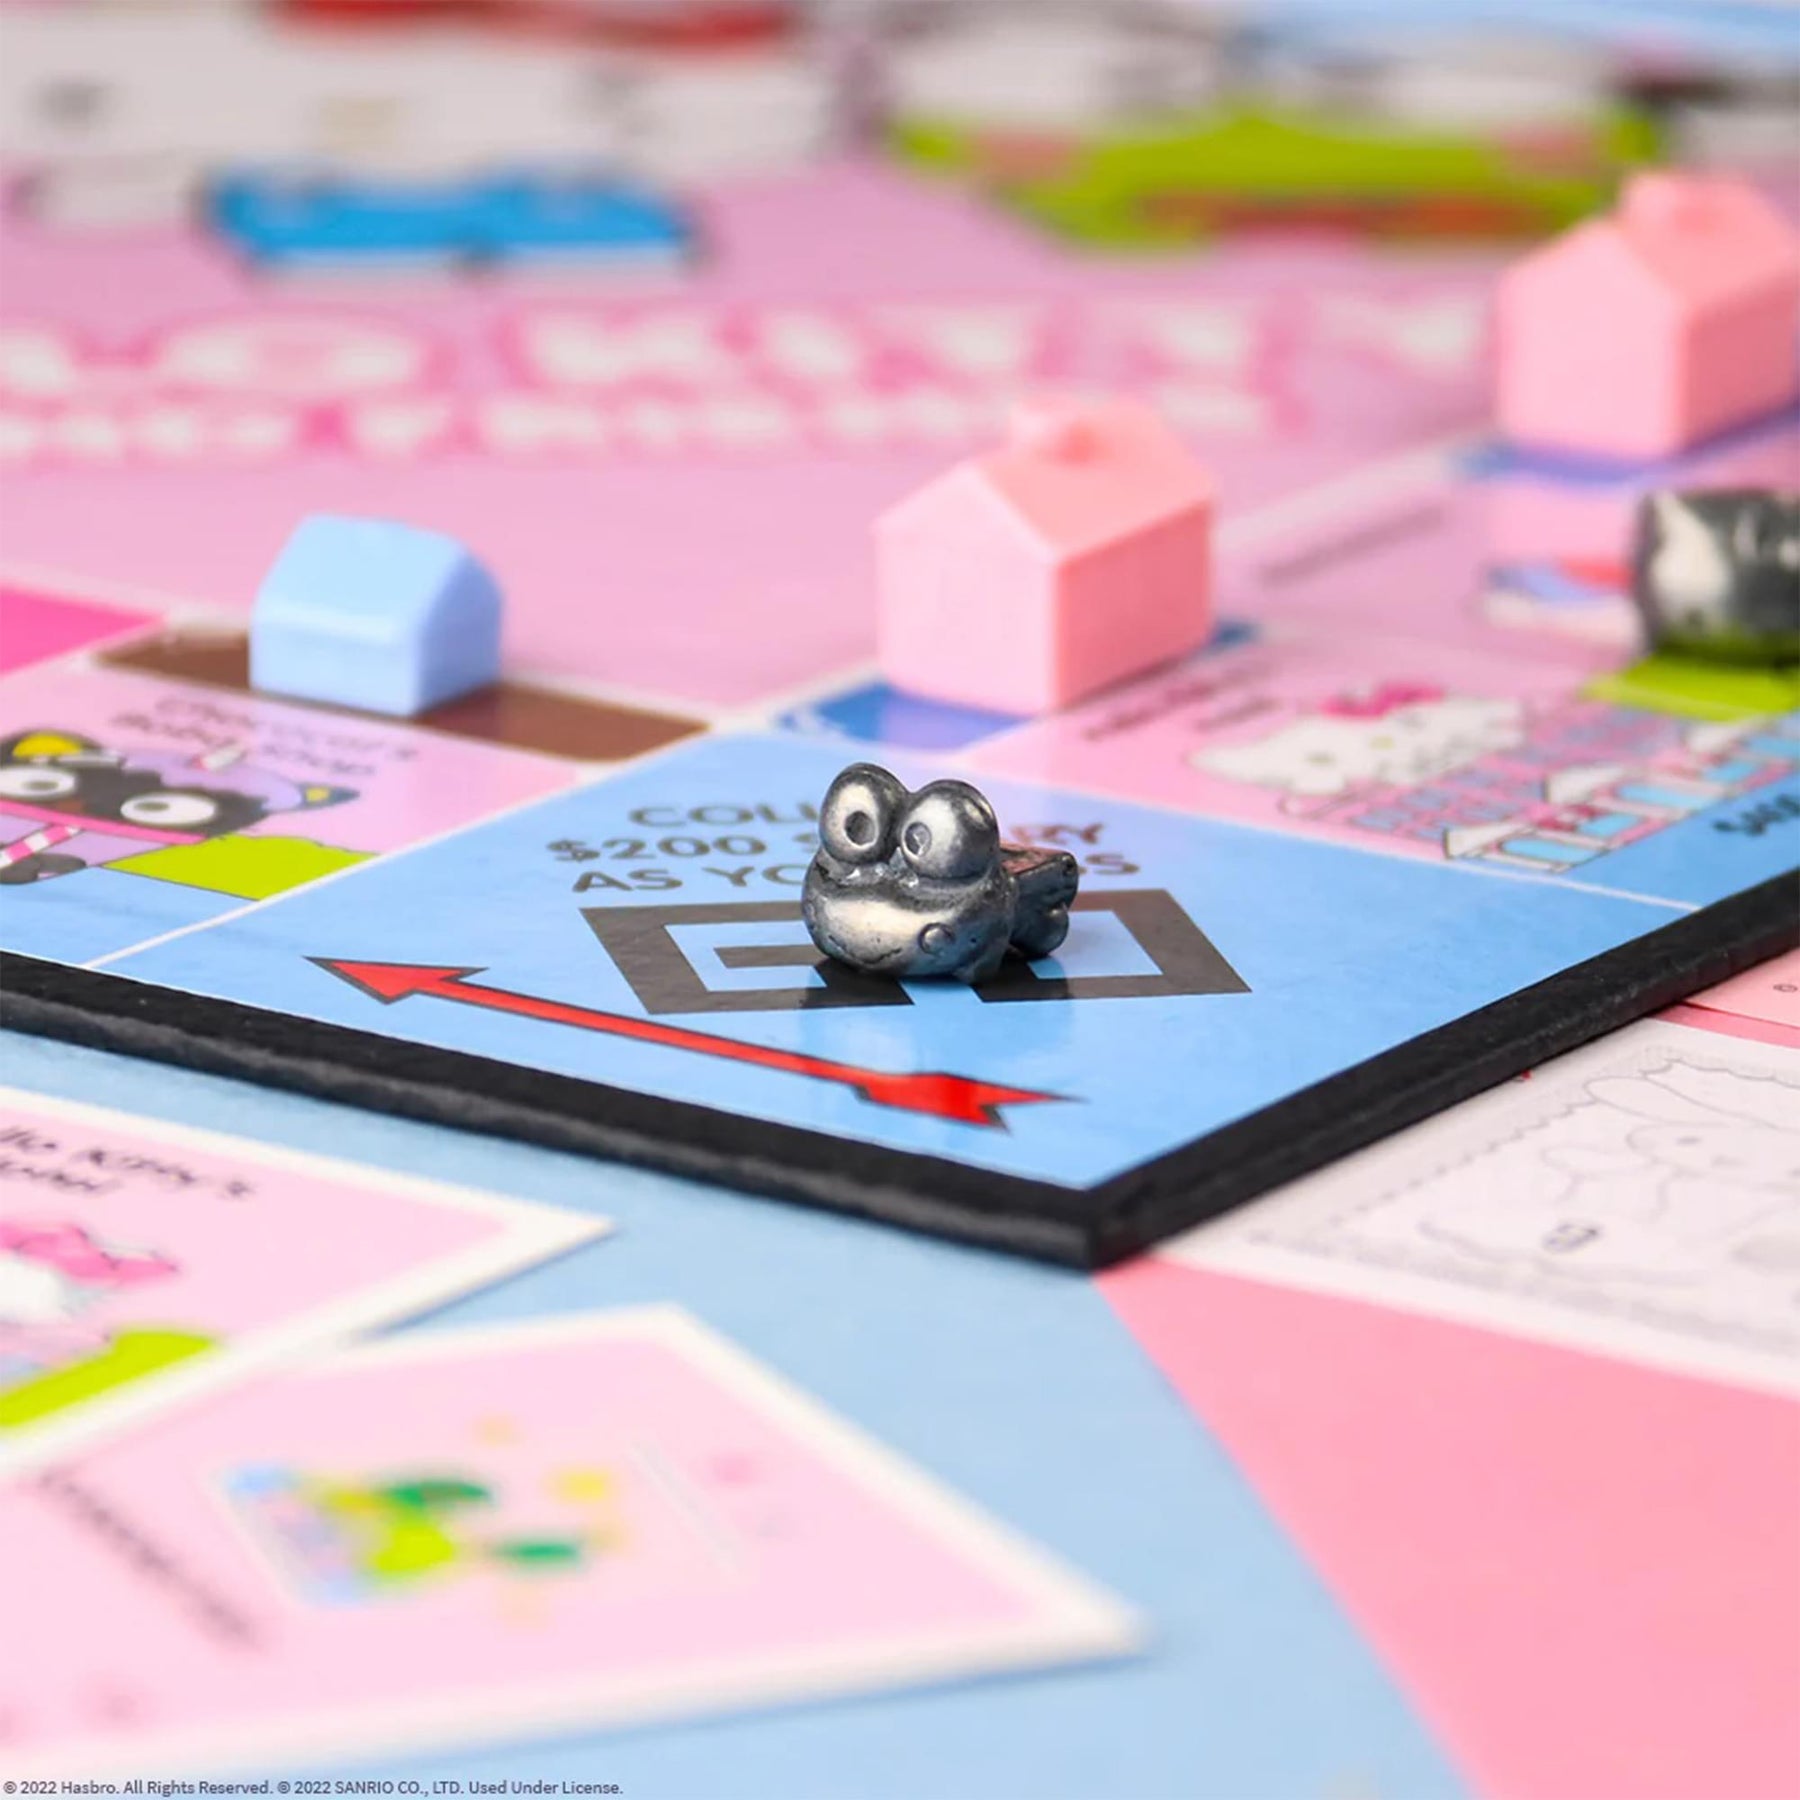 Hello Kitty and Friends Monopoly Board Game